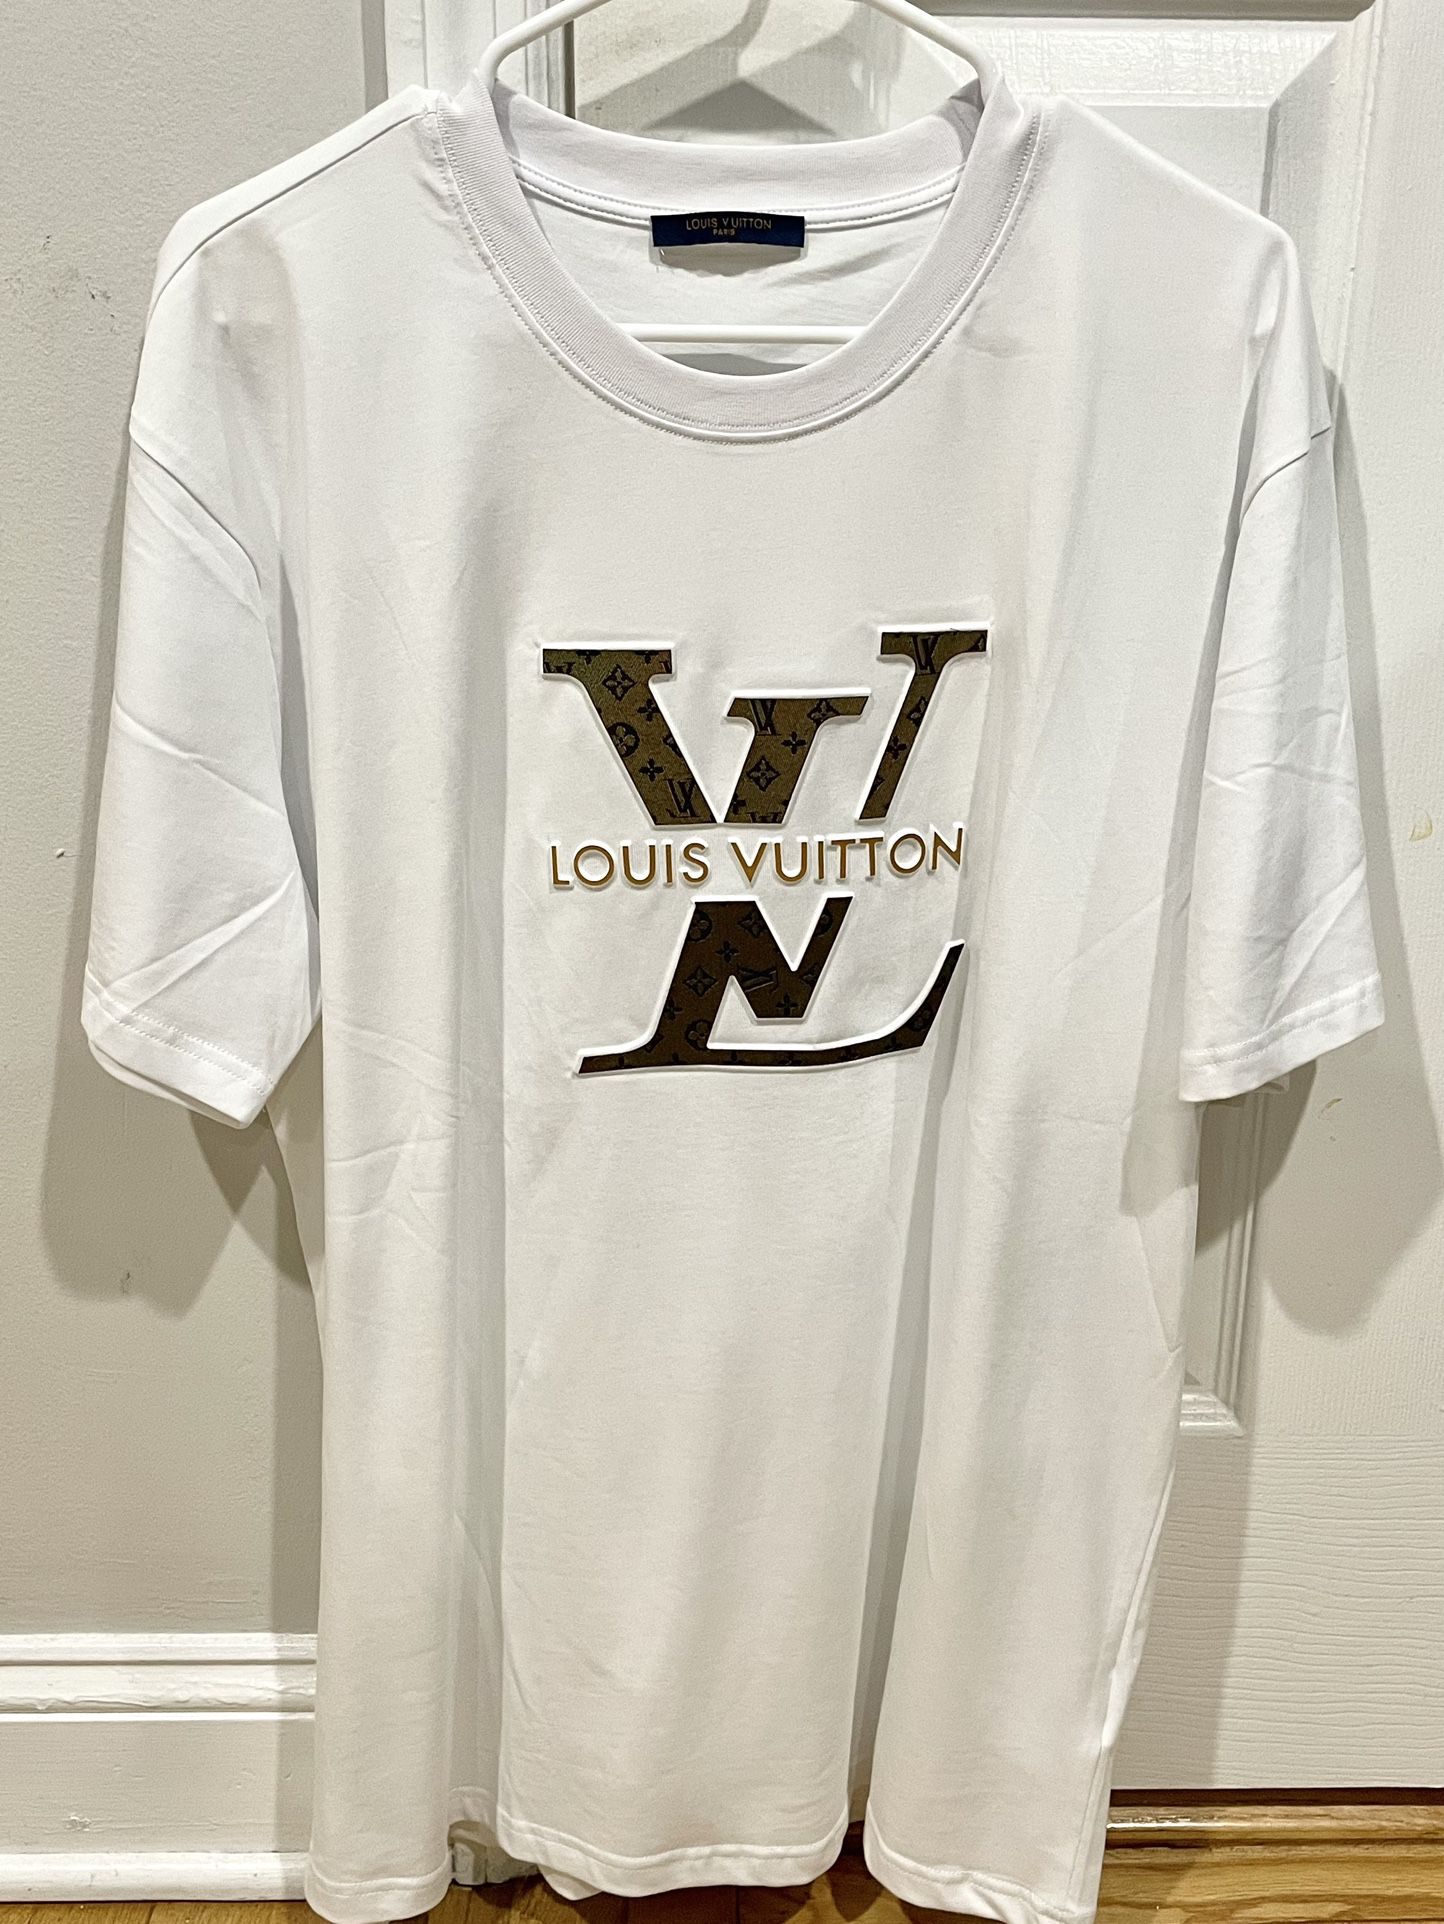 Men’s Louis Vuitton T-Shirt Size XL for Sale in The Bronx, New York -  OfferUp